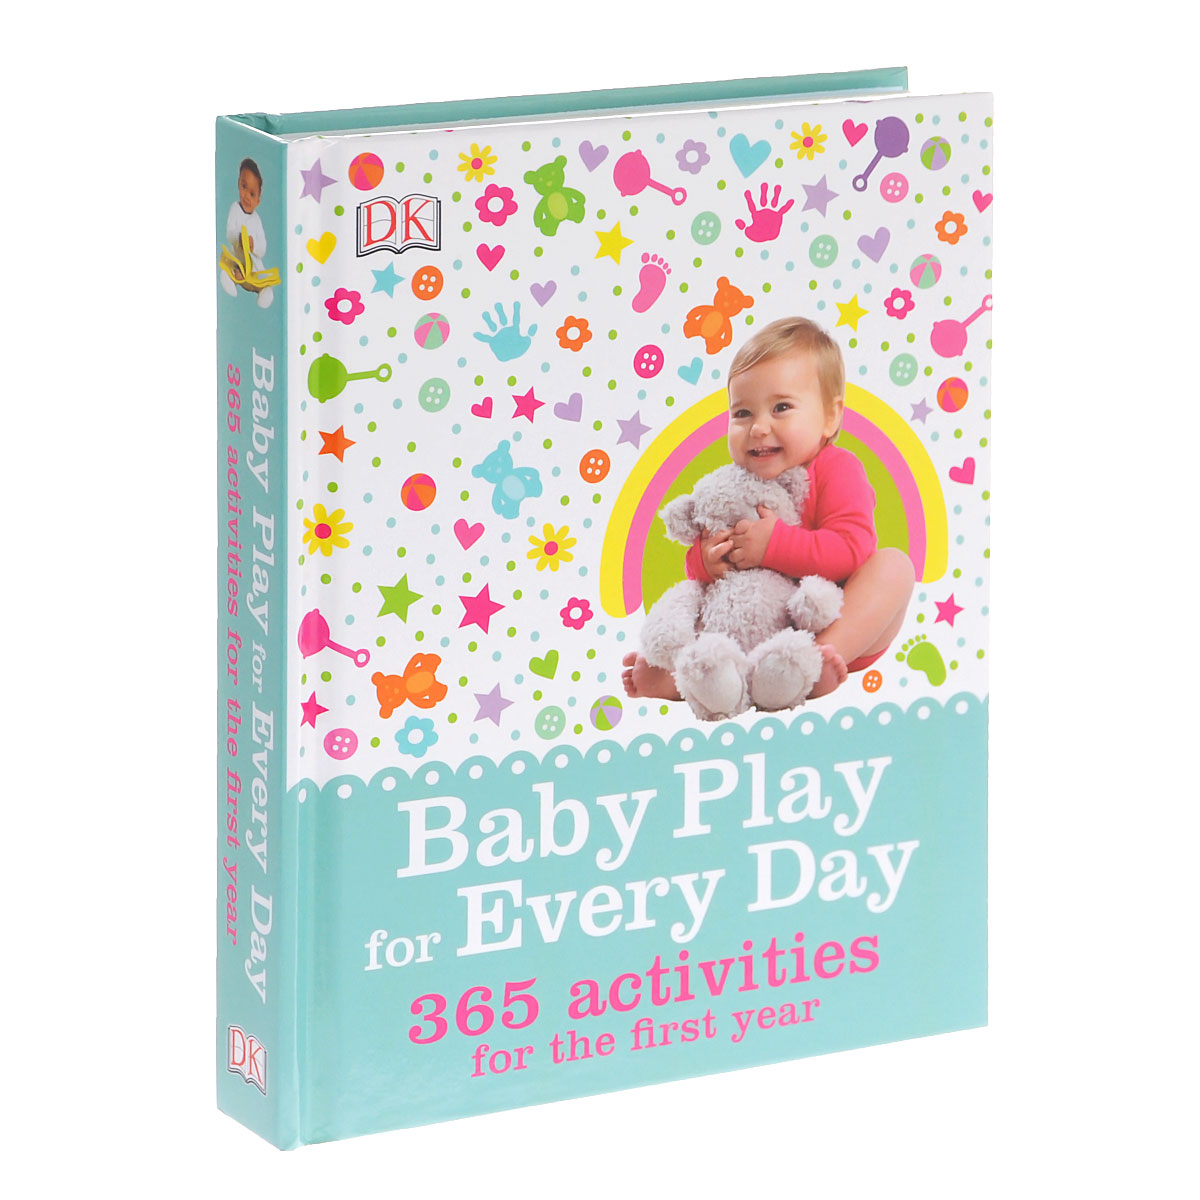 Baby Play for Every Day: 365 Activities for the First Year